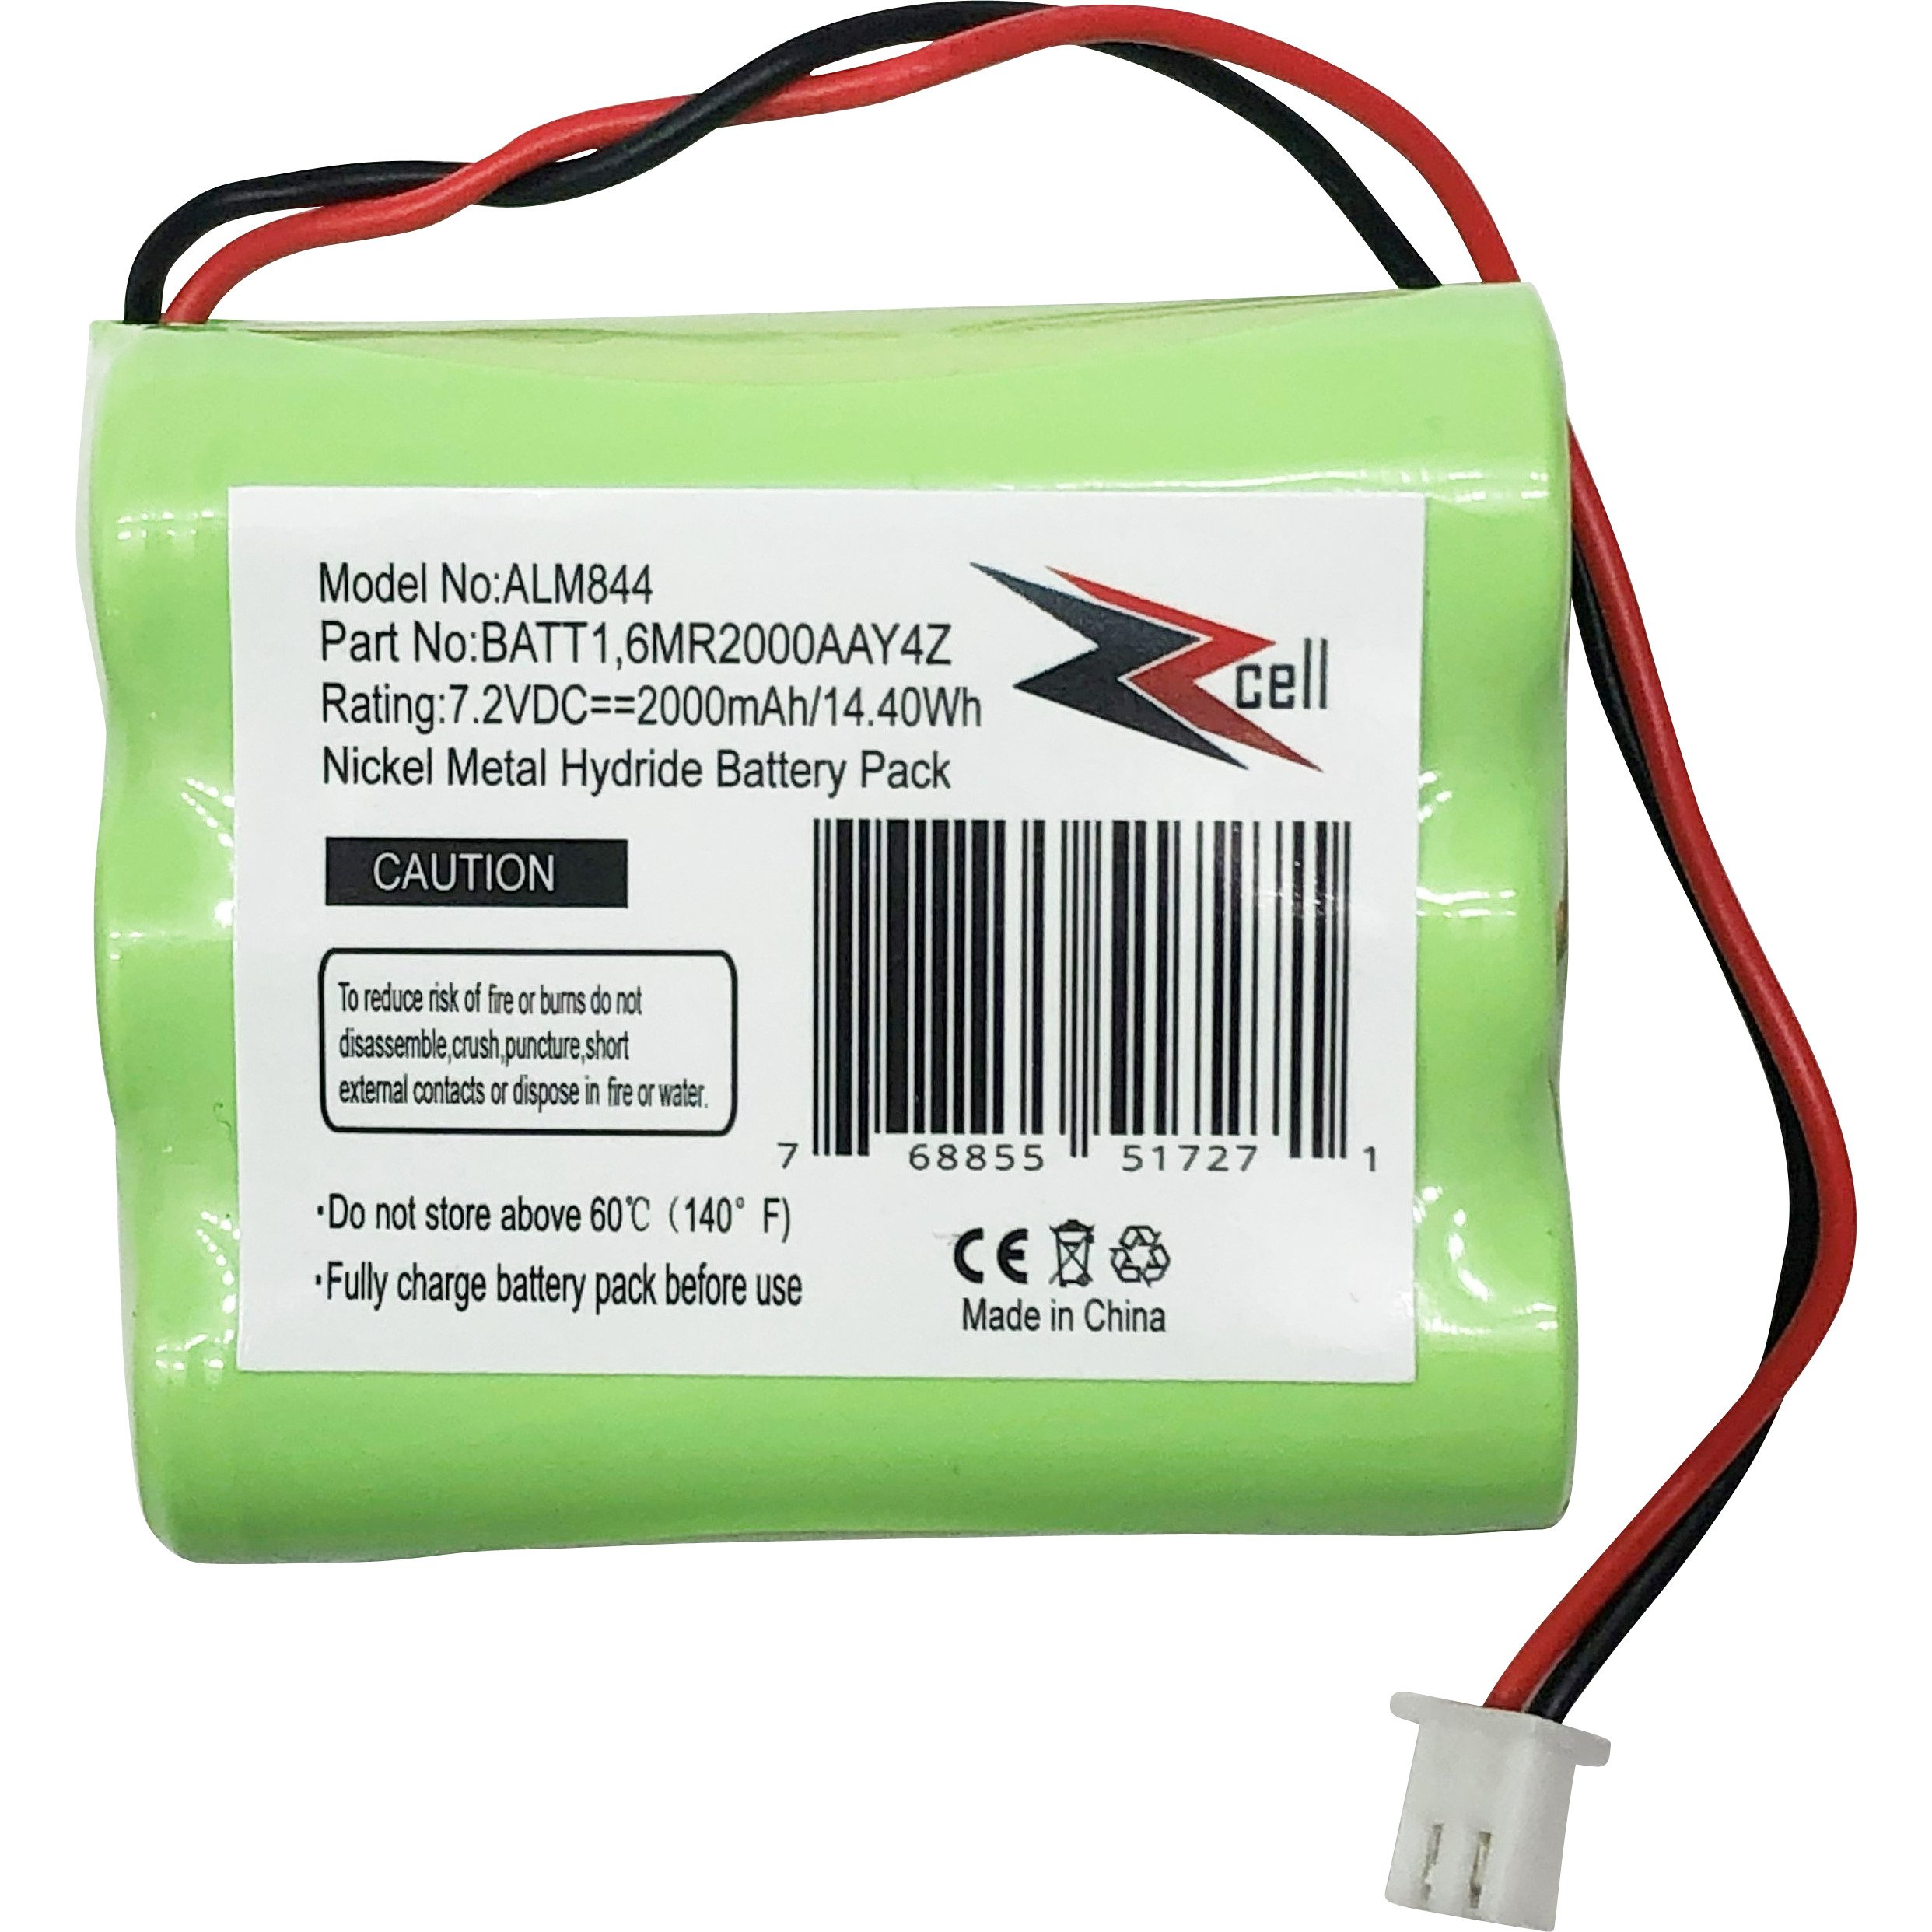 ZZcell Replacement Battery For 2Gig BATT1, BATT1X, BATT2X, 6MR2000AAY4Z, GC2 2GIG-CNTRL2 2GIG-CP2, GCKIT311, 228844, Go Control Panel Alarm System 10-000013-001, PERS-4200 - image 2 of 6